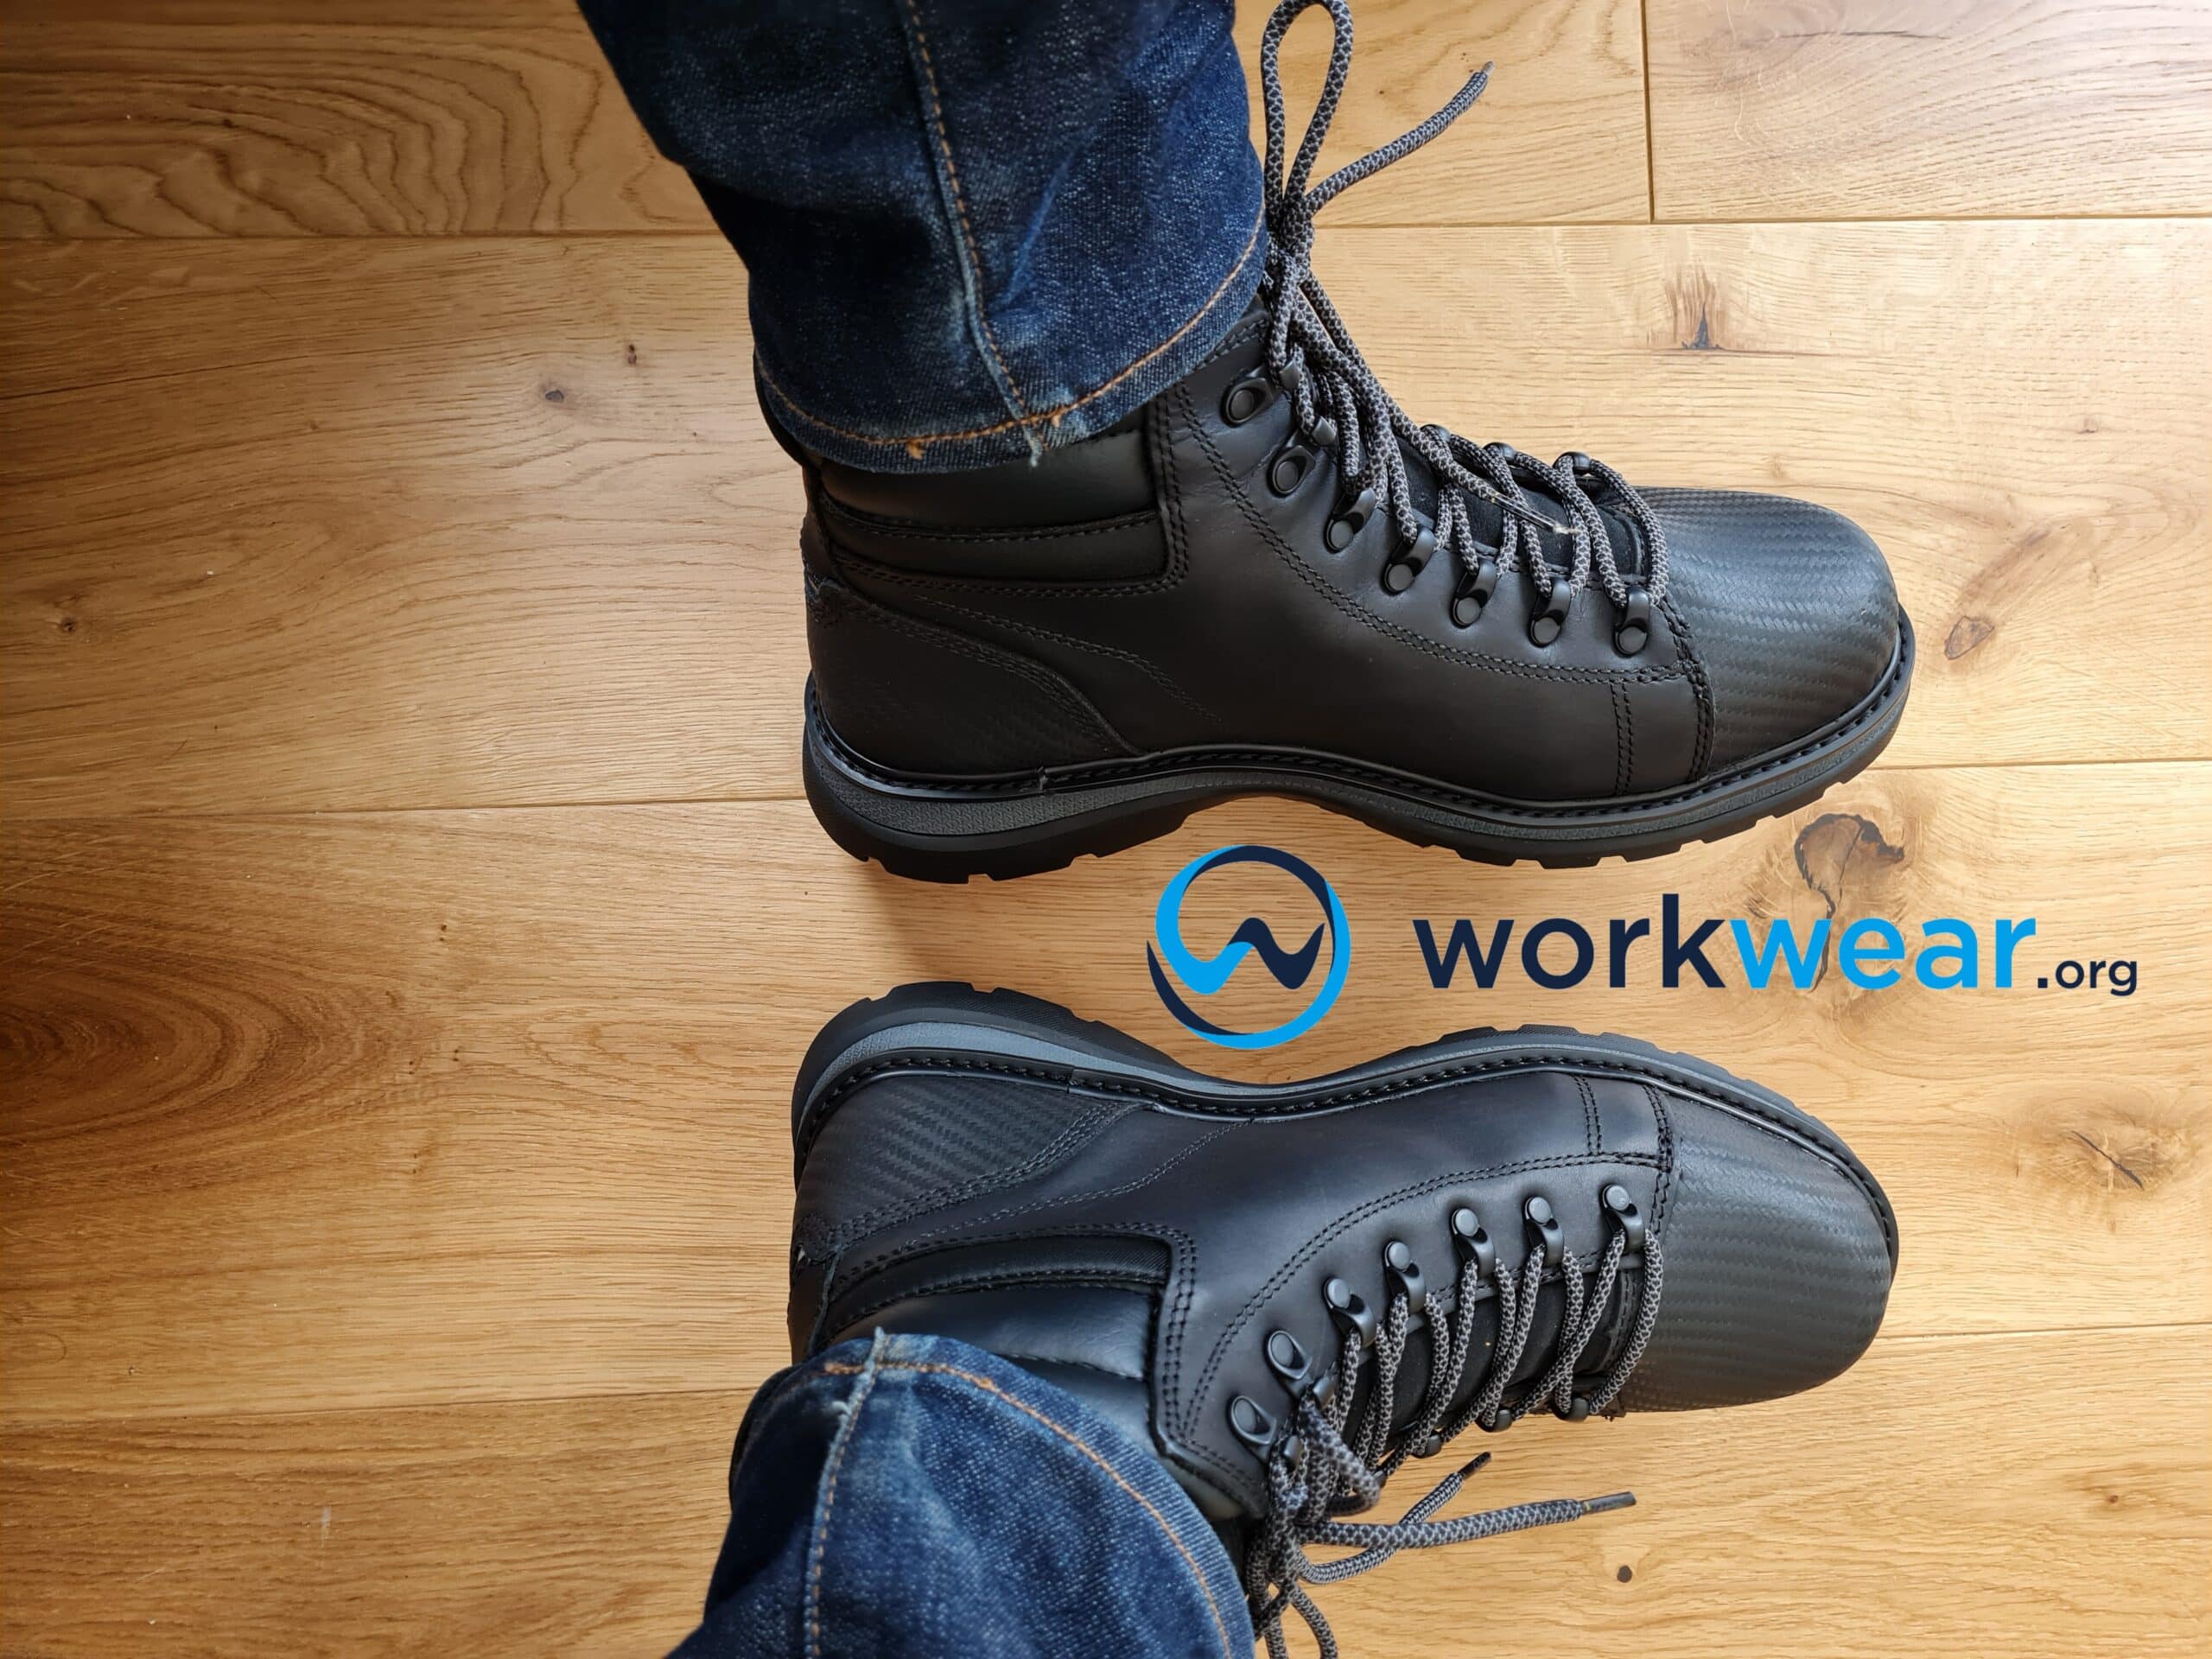 4e Wide Work Boots What Are They | WorkWear.org